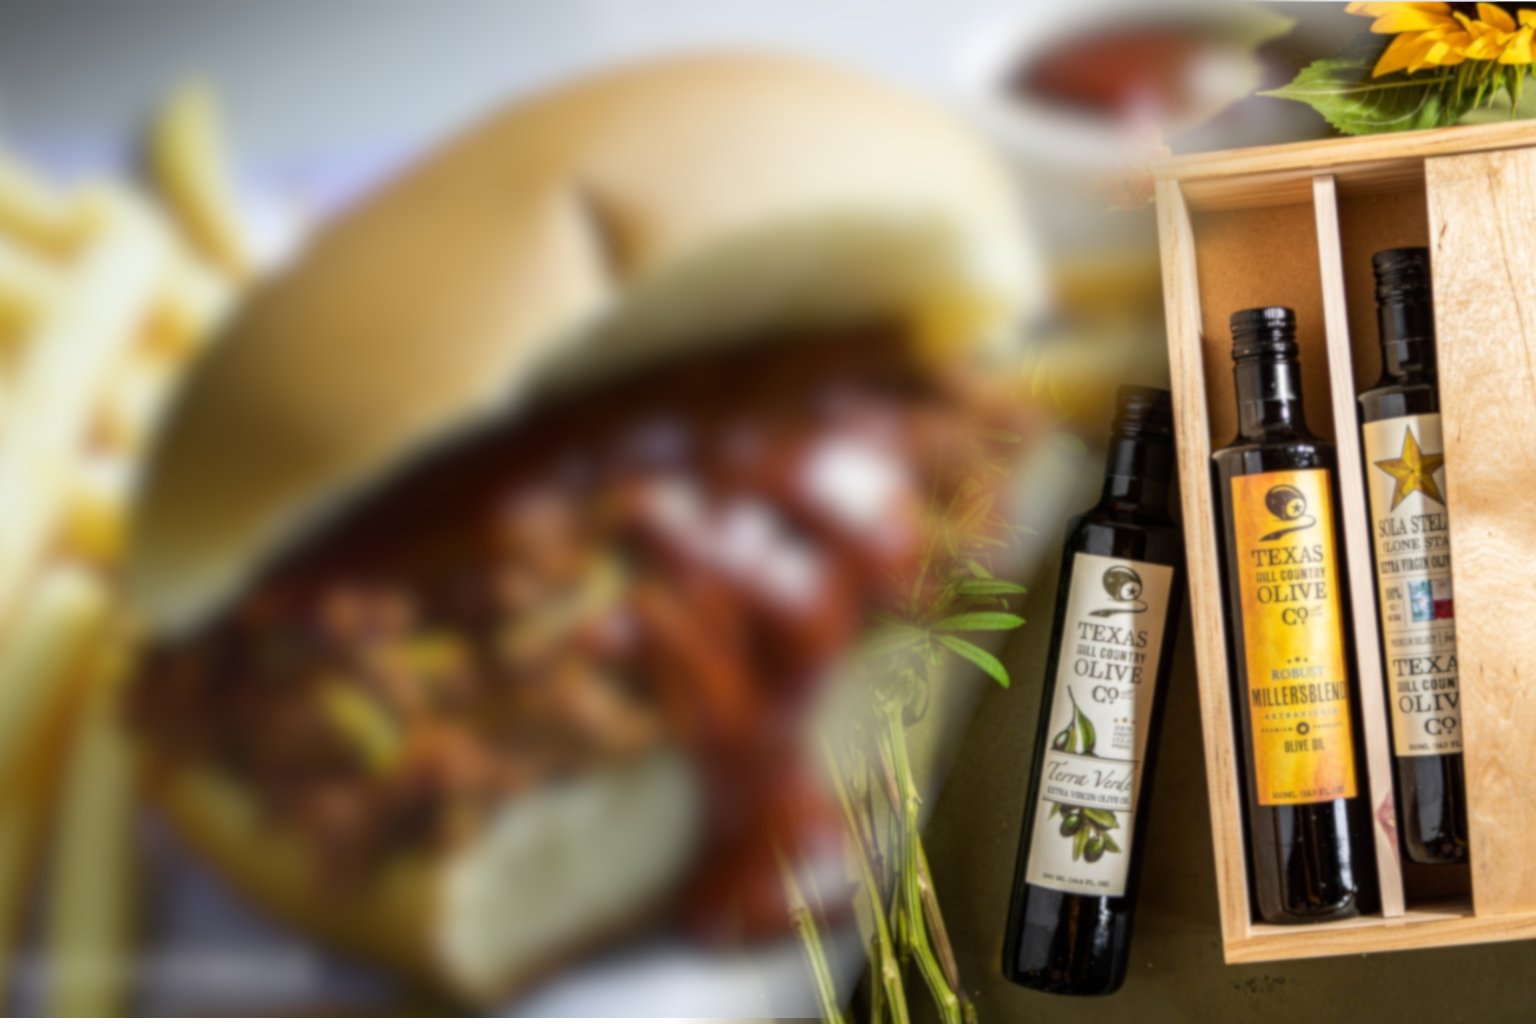 Renovating the Classic Sloppy Joe With Texas Olive Oil - Texas Hill Country Olive Co.